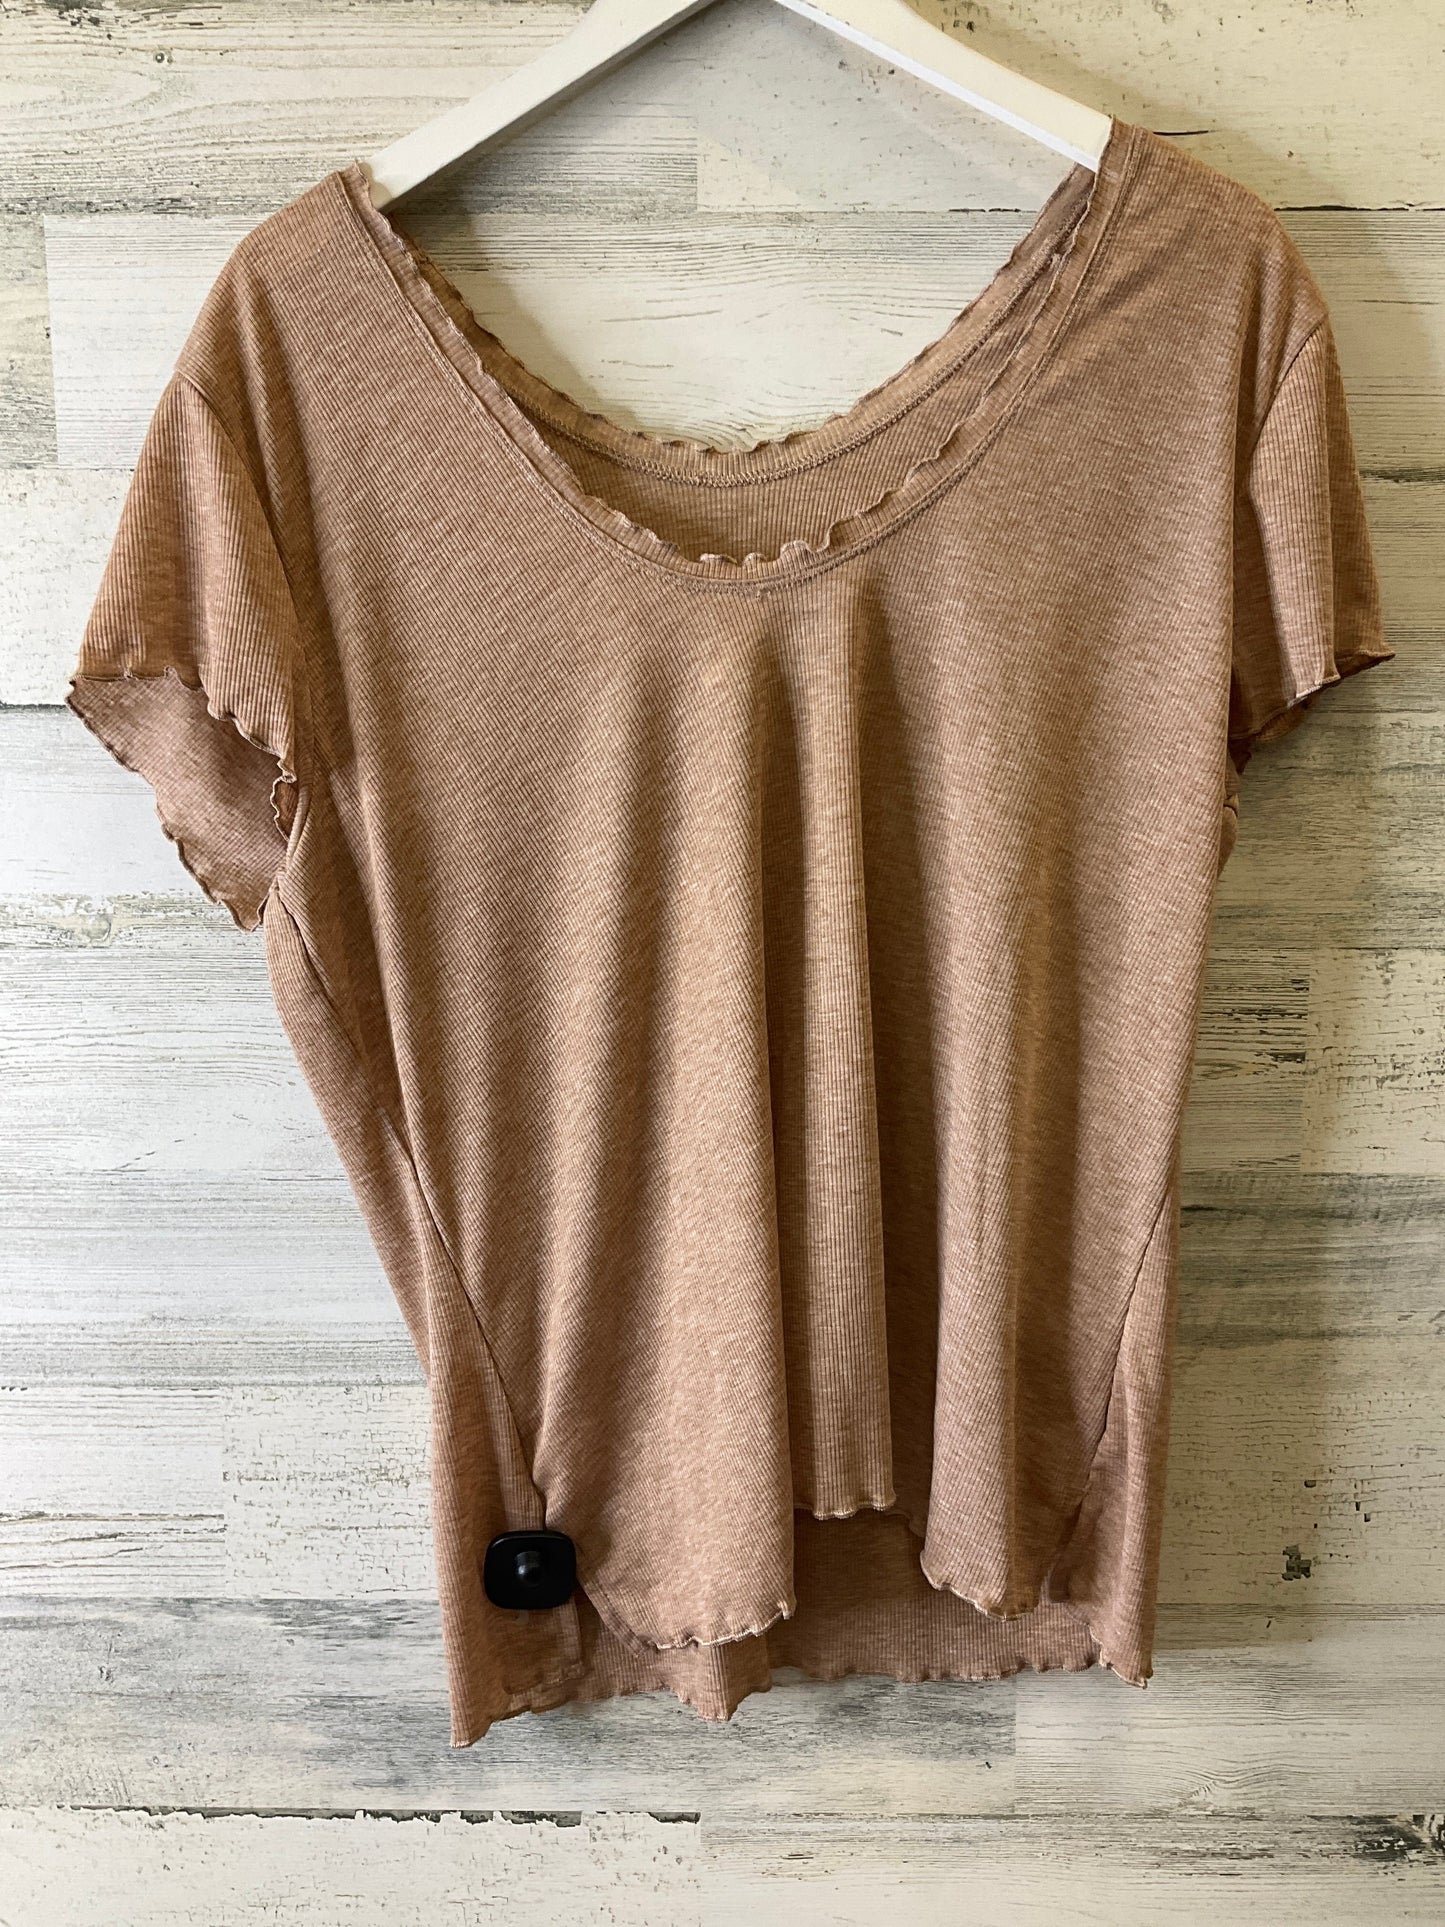 Brown Top Short Sleeve Nike Apparel, Size Xl